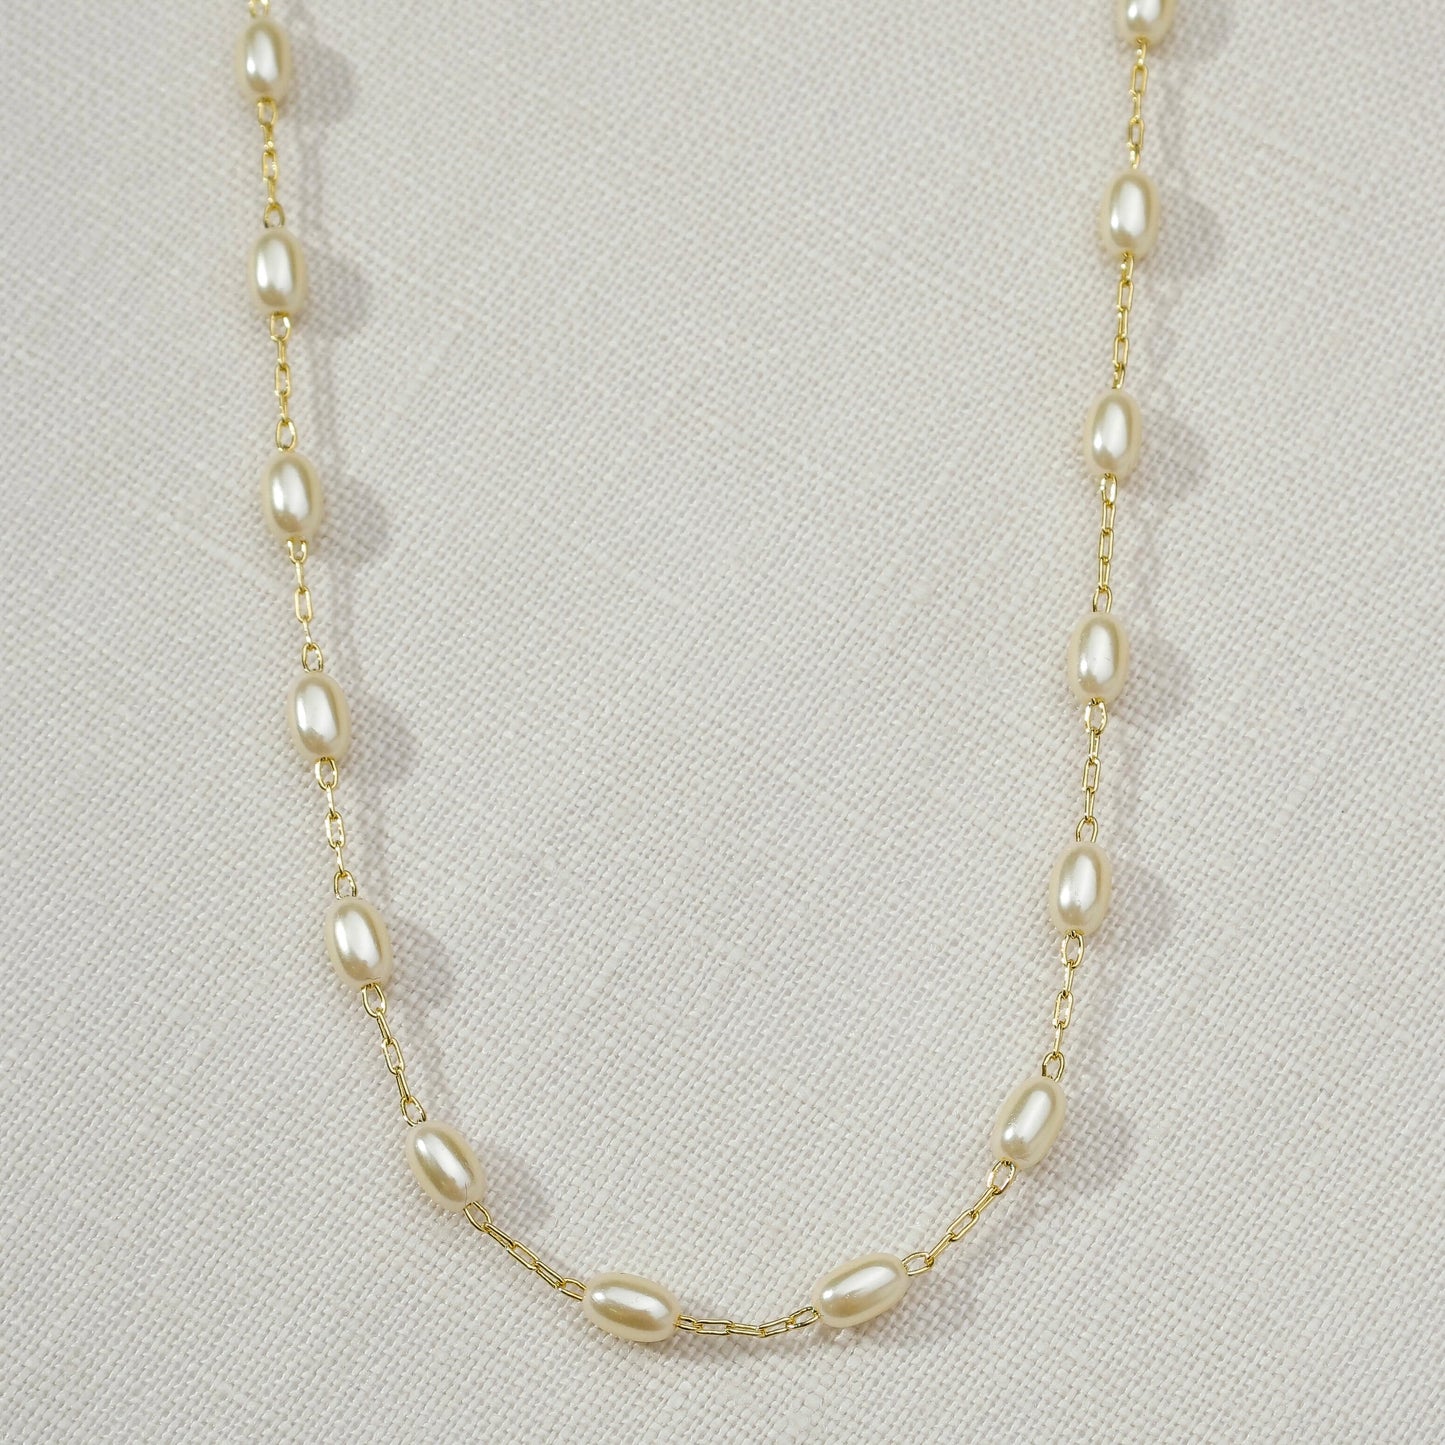 18k Gold Filled Oval Shaped Pearl Necklace